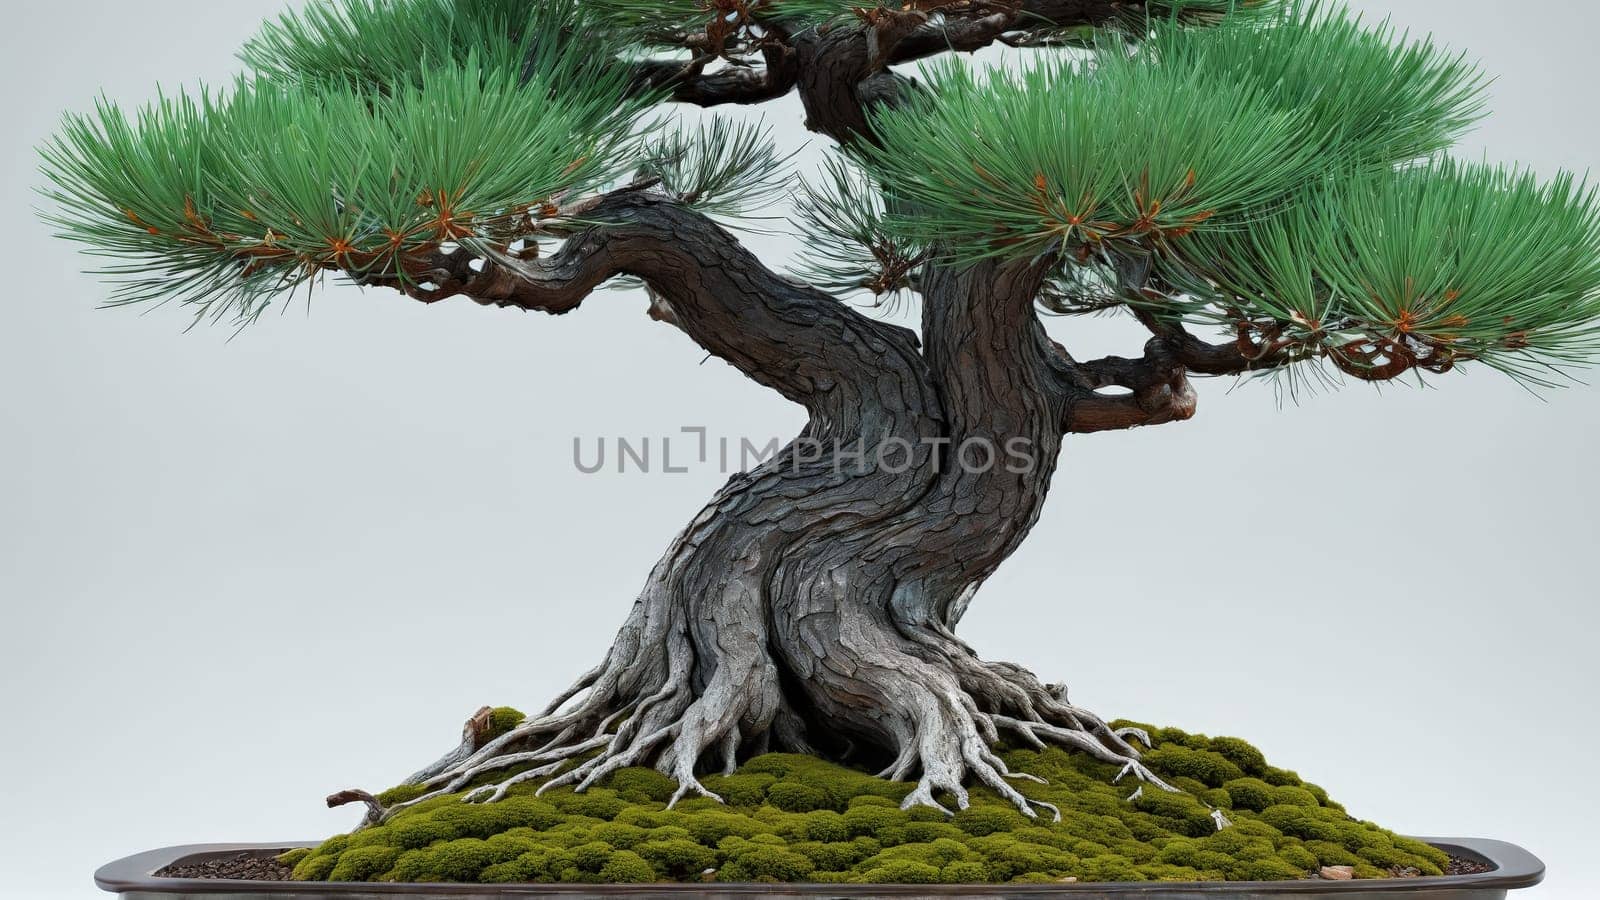 Venerable ponderosa pine bonsai with plated bark and long blue een needles stark white by panophotograph